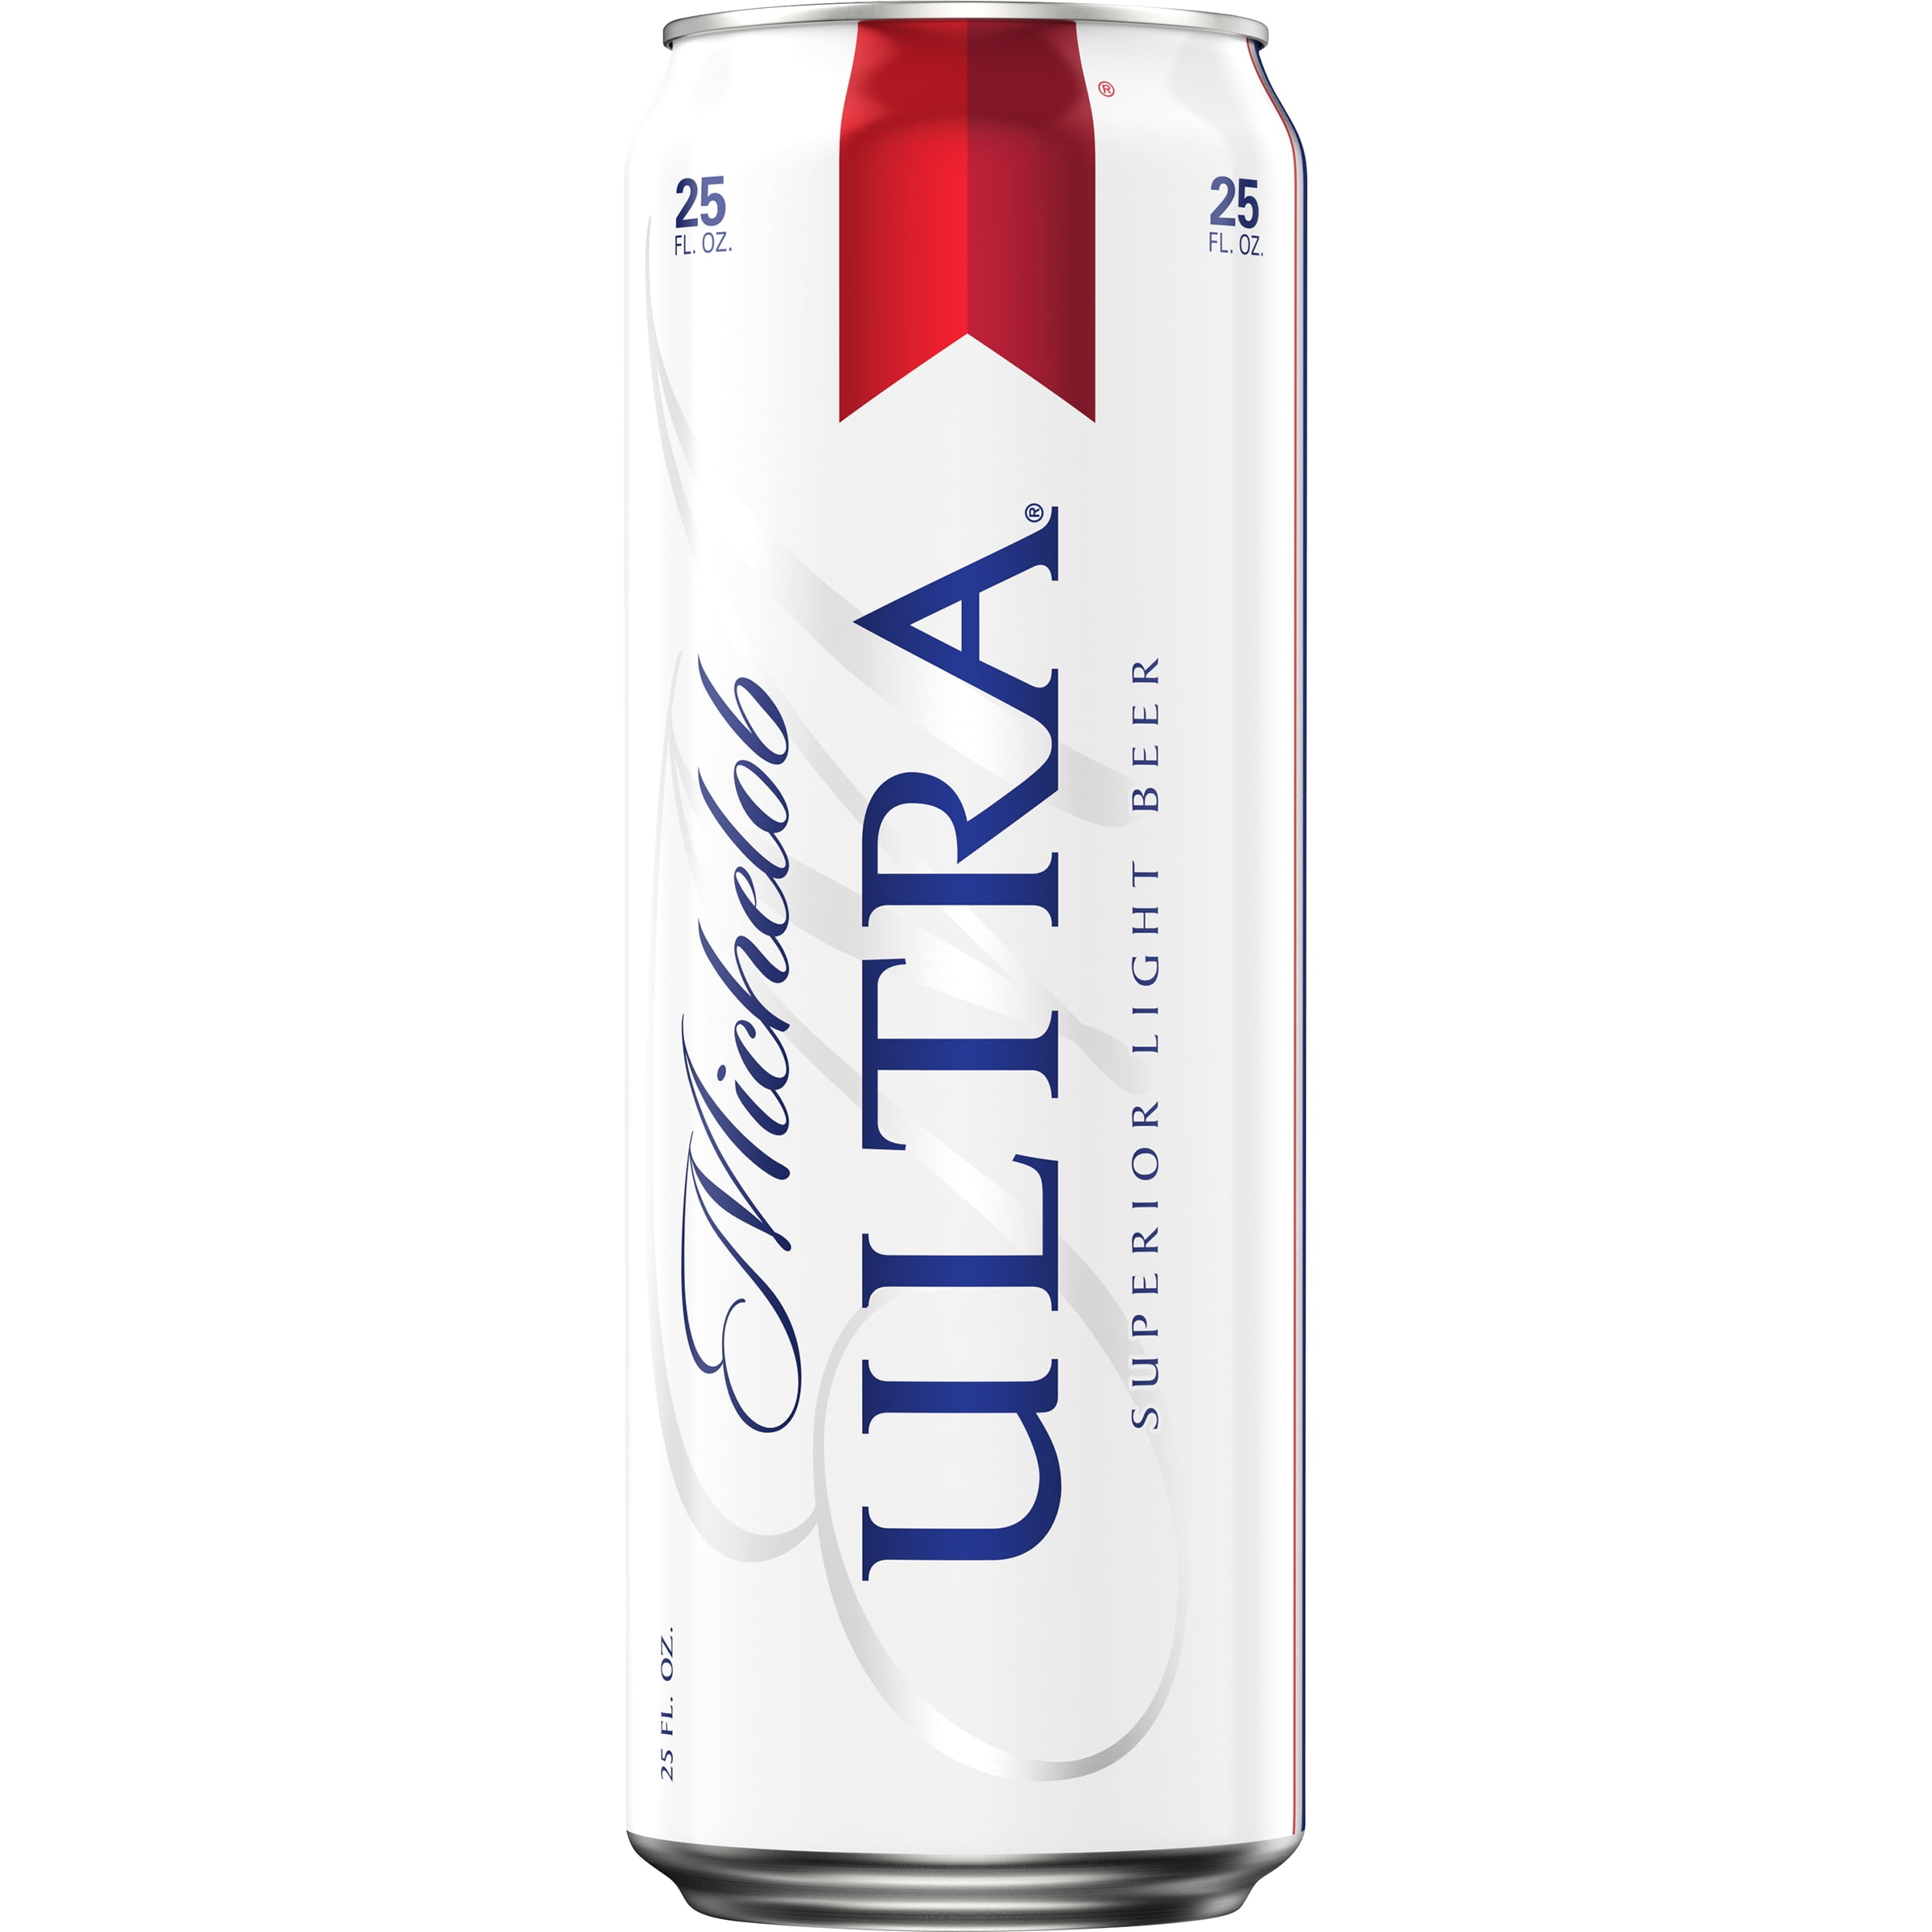 Michelob Ultra Nutrition Facts Alcohol Content | Besto Blog